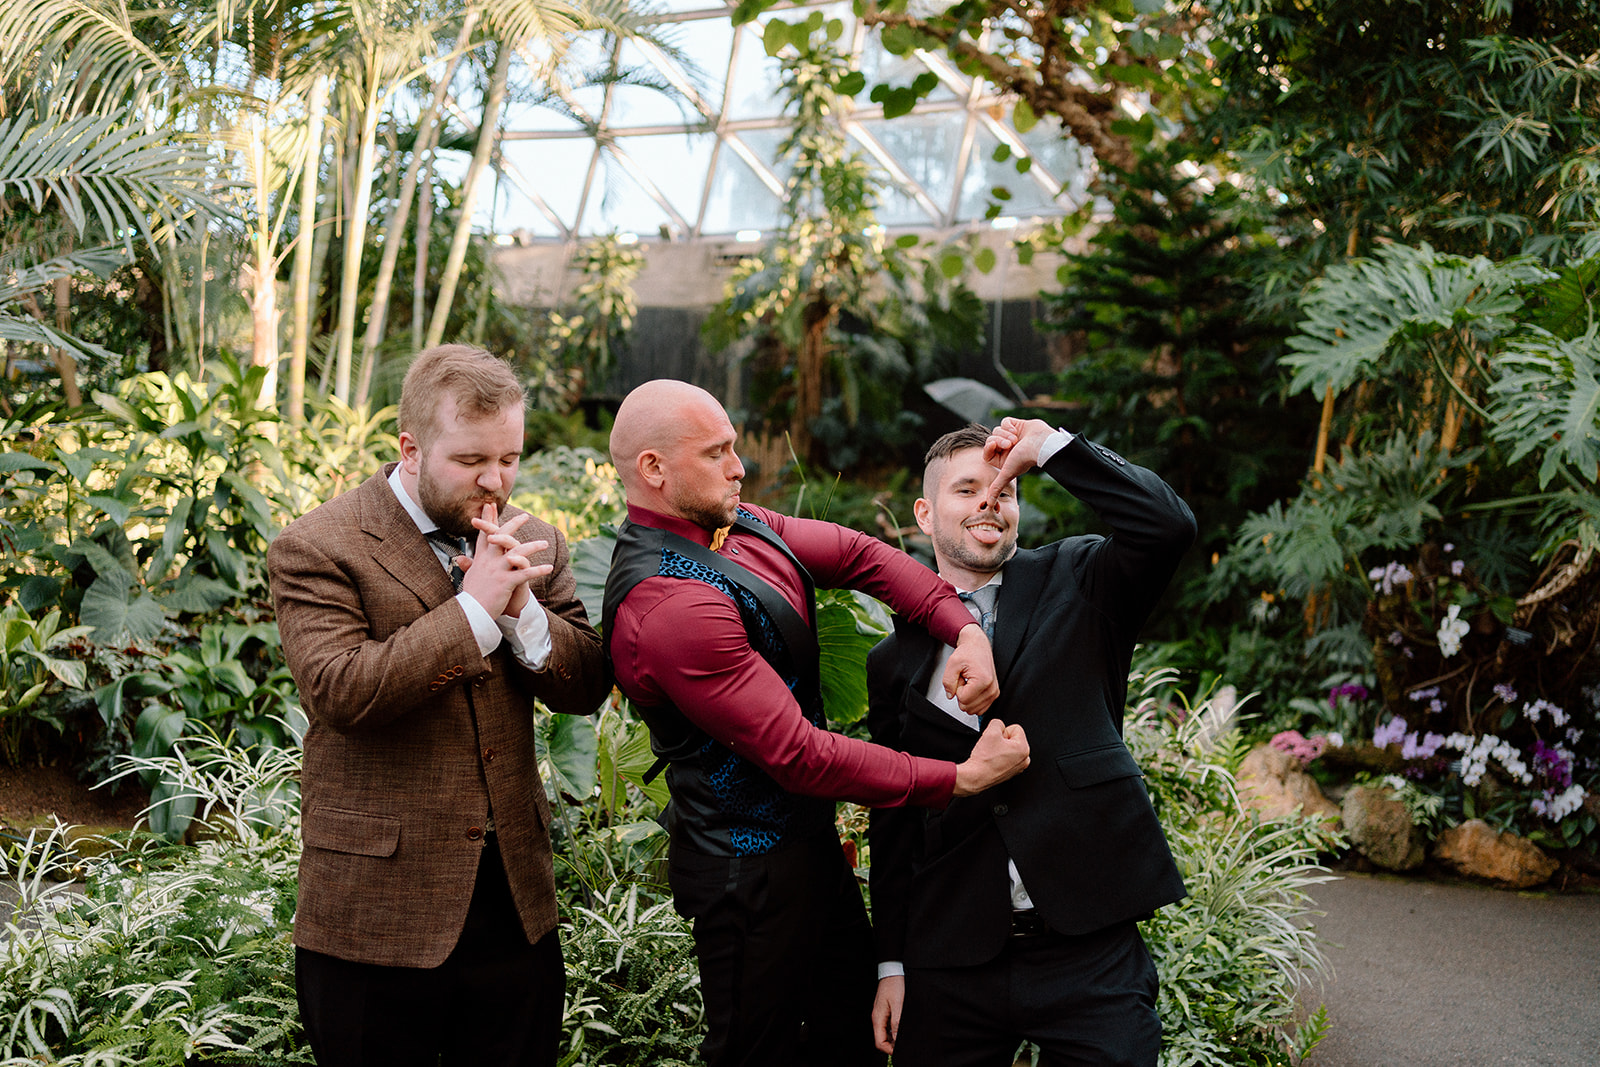 groom and groomsmen being silly at wedding with young hip & married; wedding puns, wedding jokes